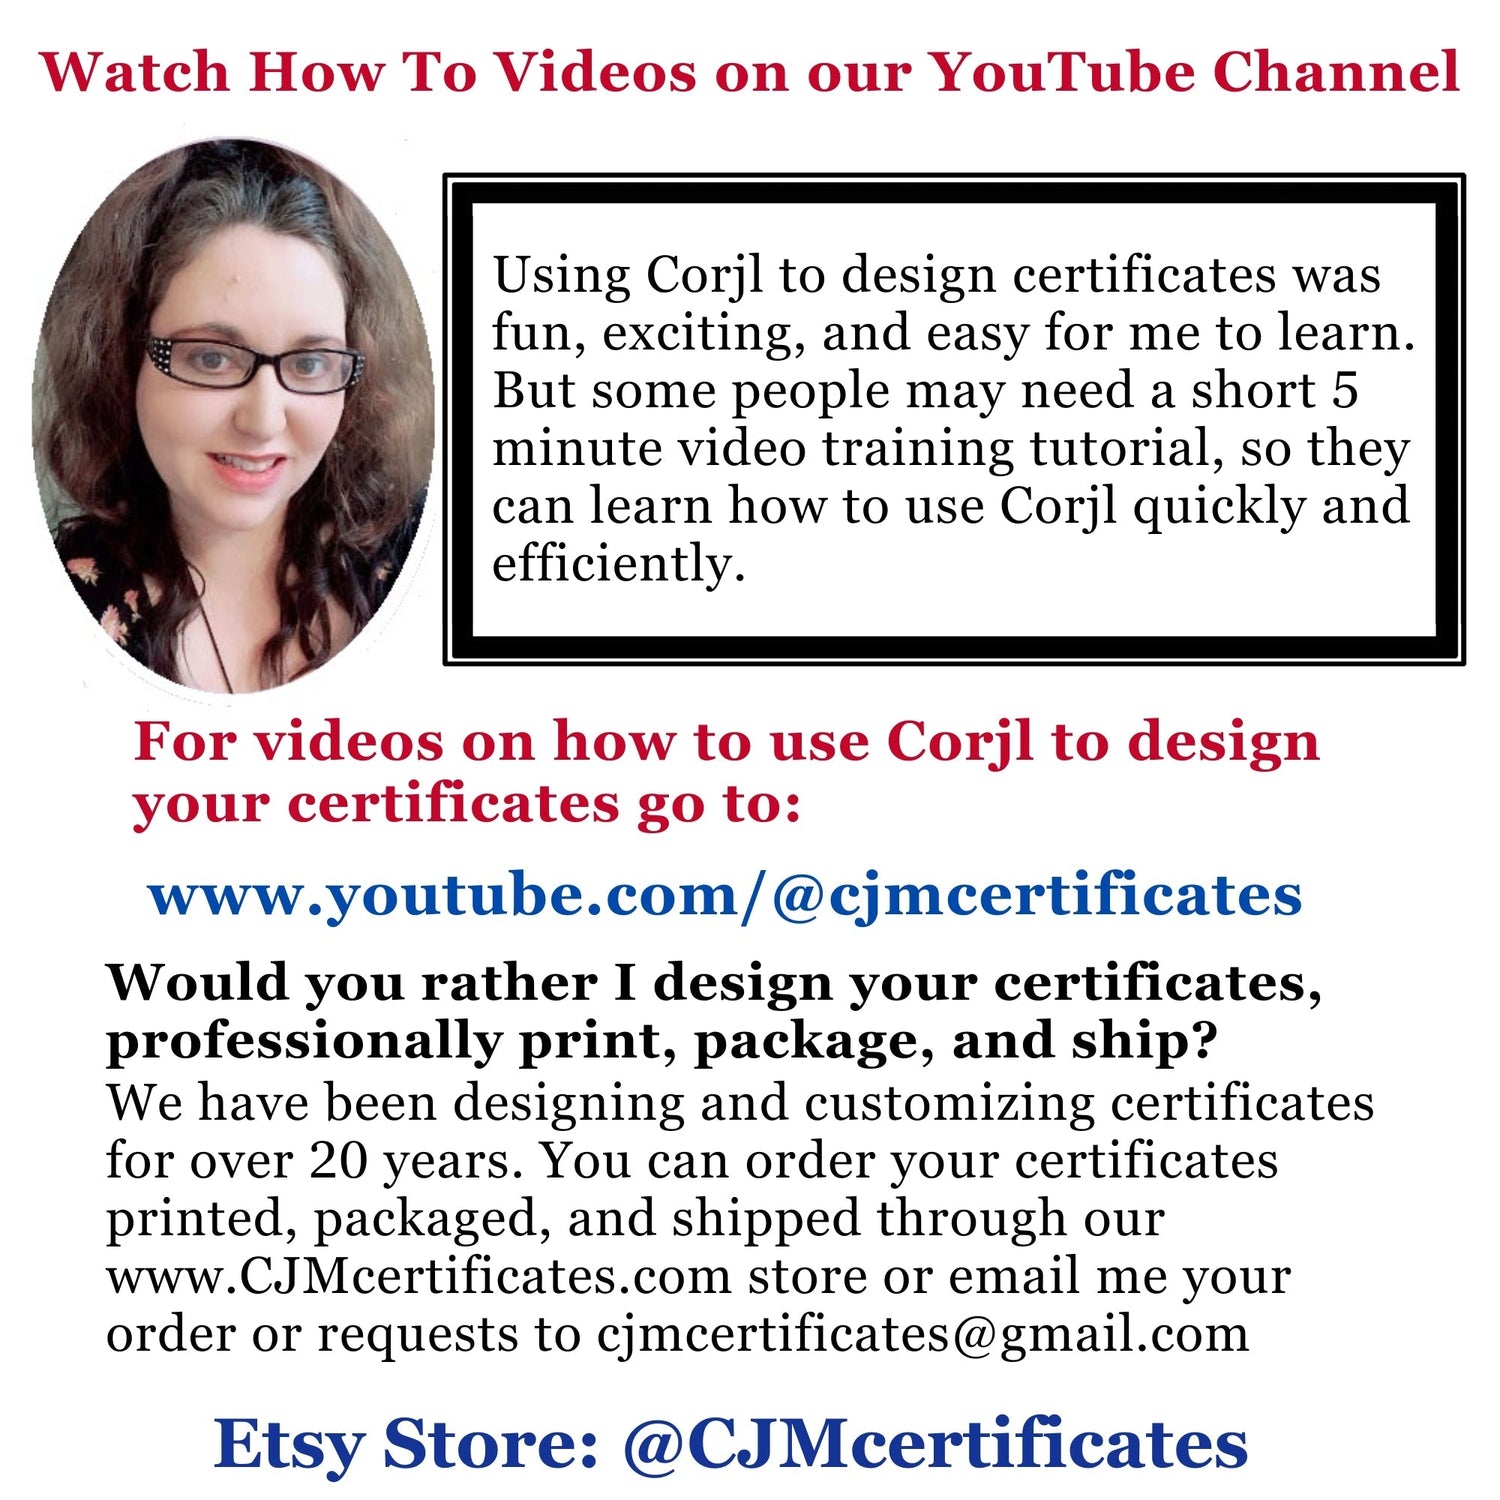 Learn How to Design Your Military Certificates through our YouTube Channel @cjmcertificates